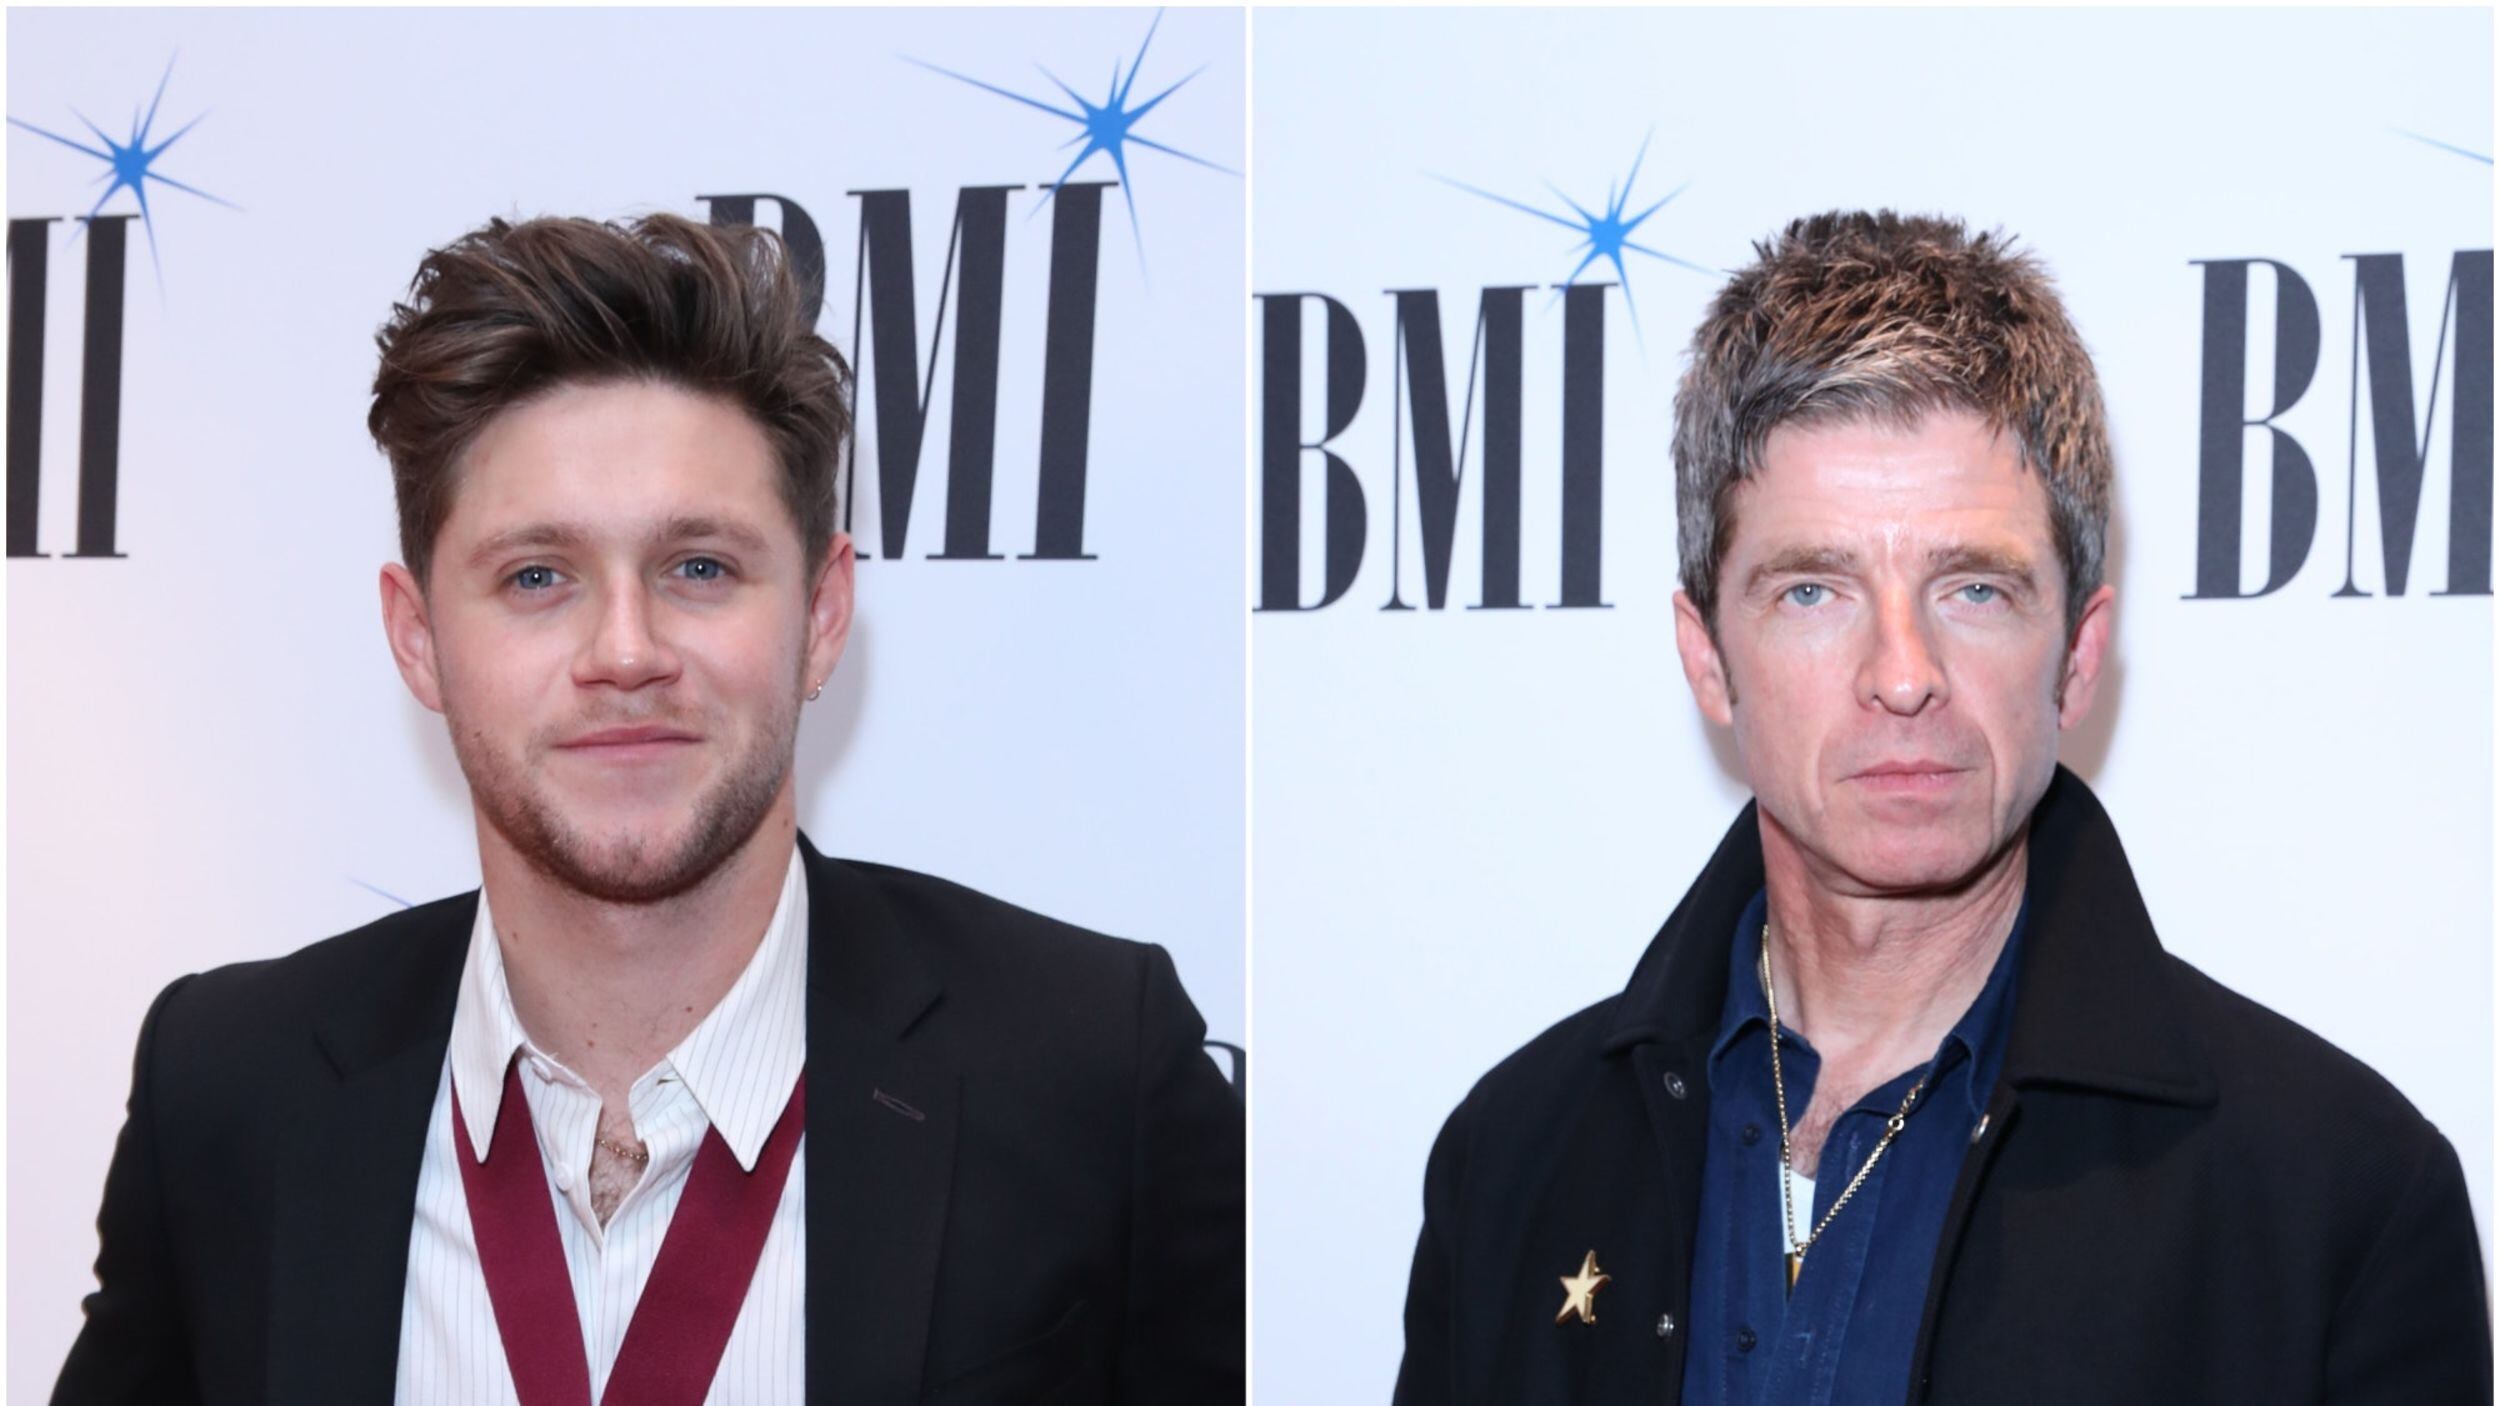 The pair attended the BMI London Awards.